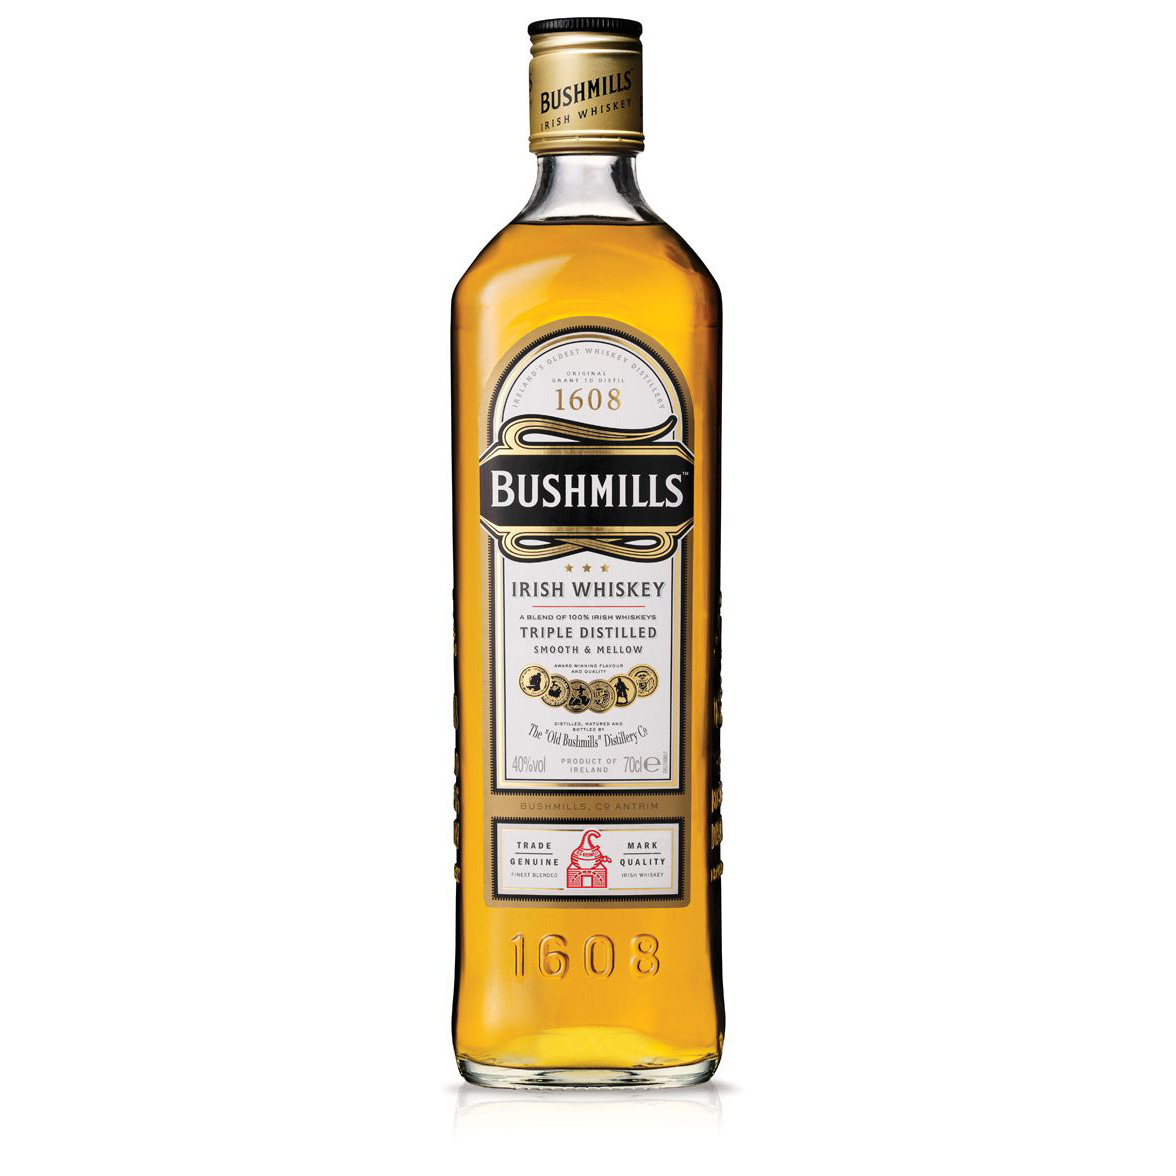 buy-for-home-delivery-bushmills-irish-whiskey-online-now-buy-online